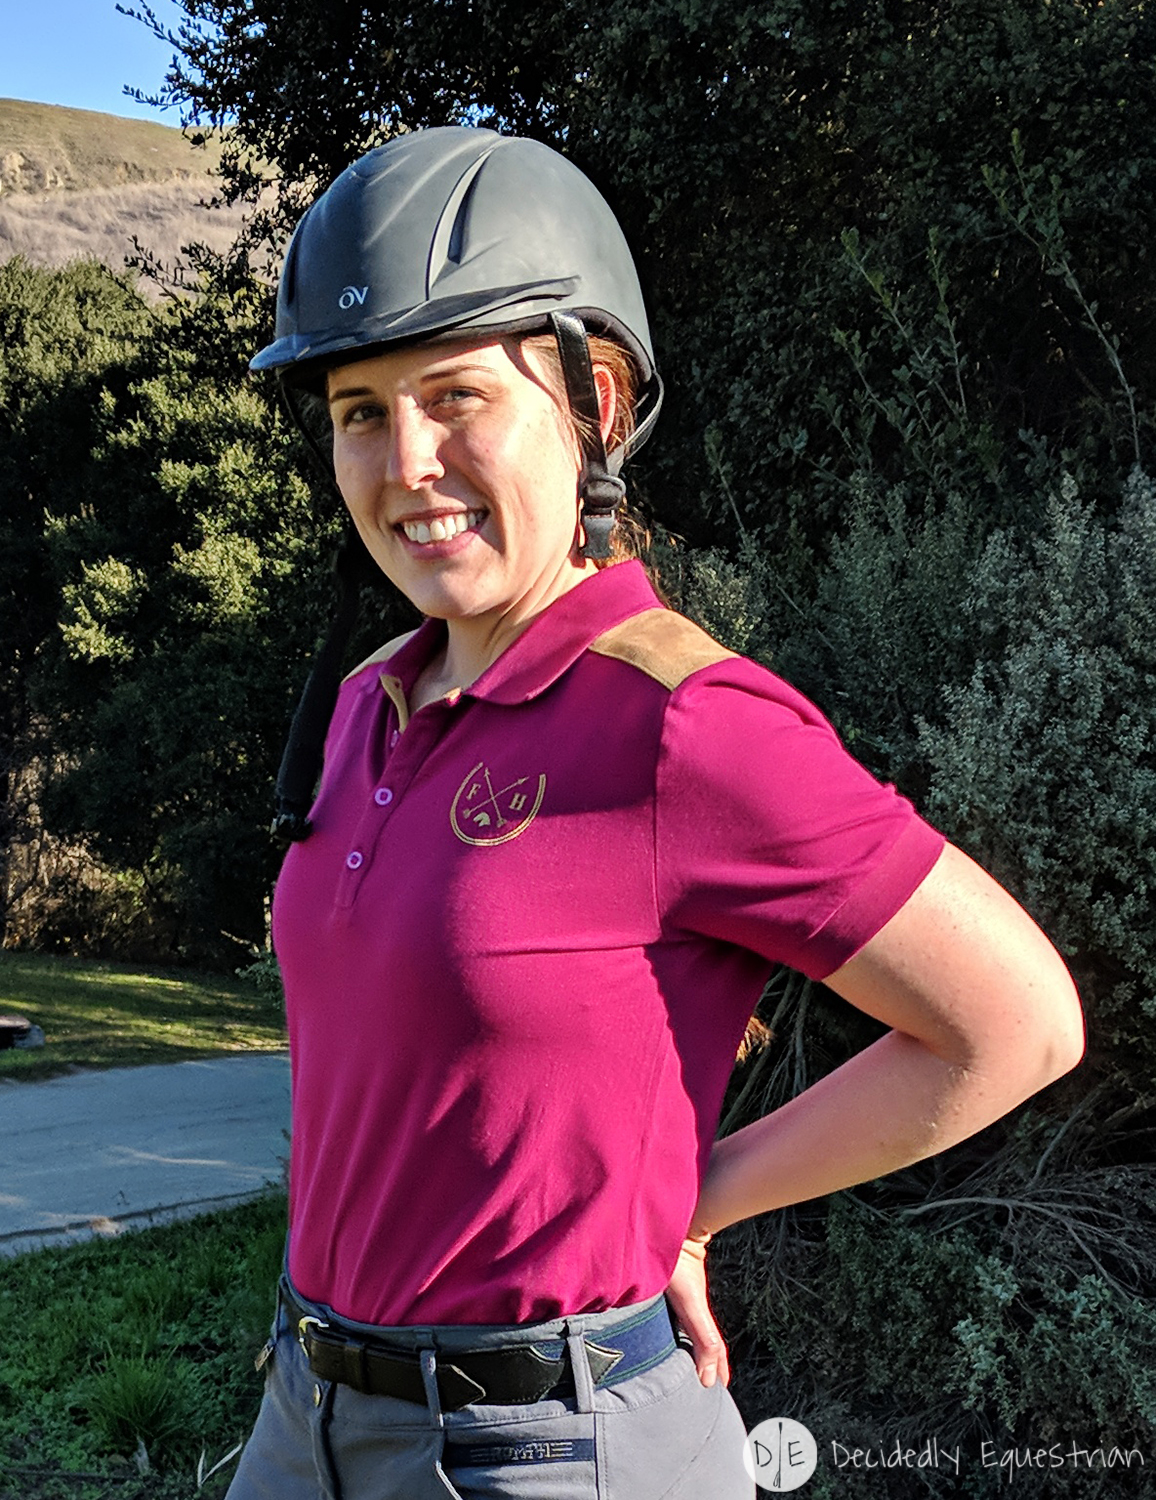 Knox Luxury Polo from Foxtrot Horseware Review